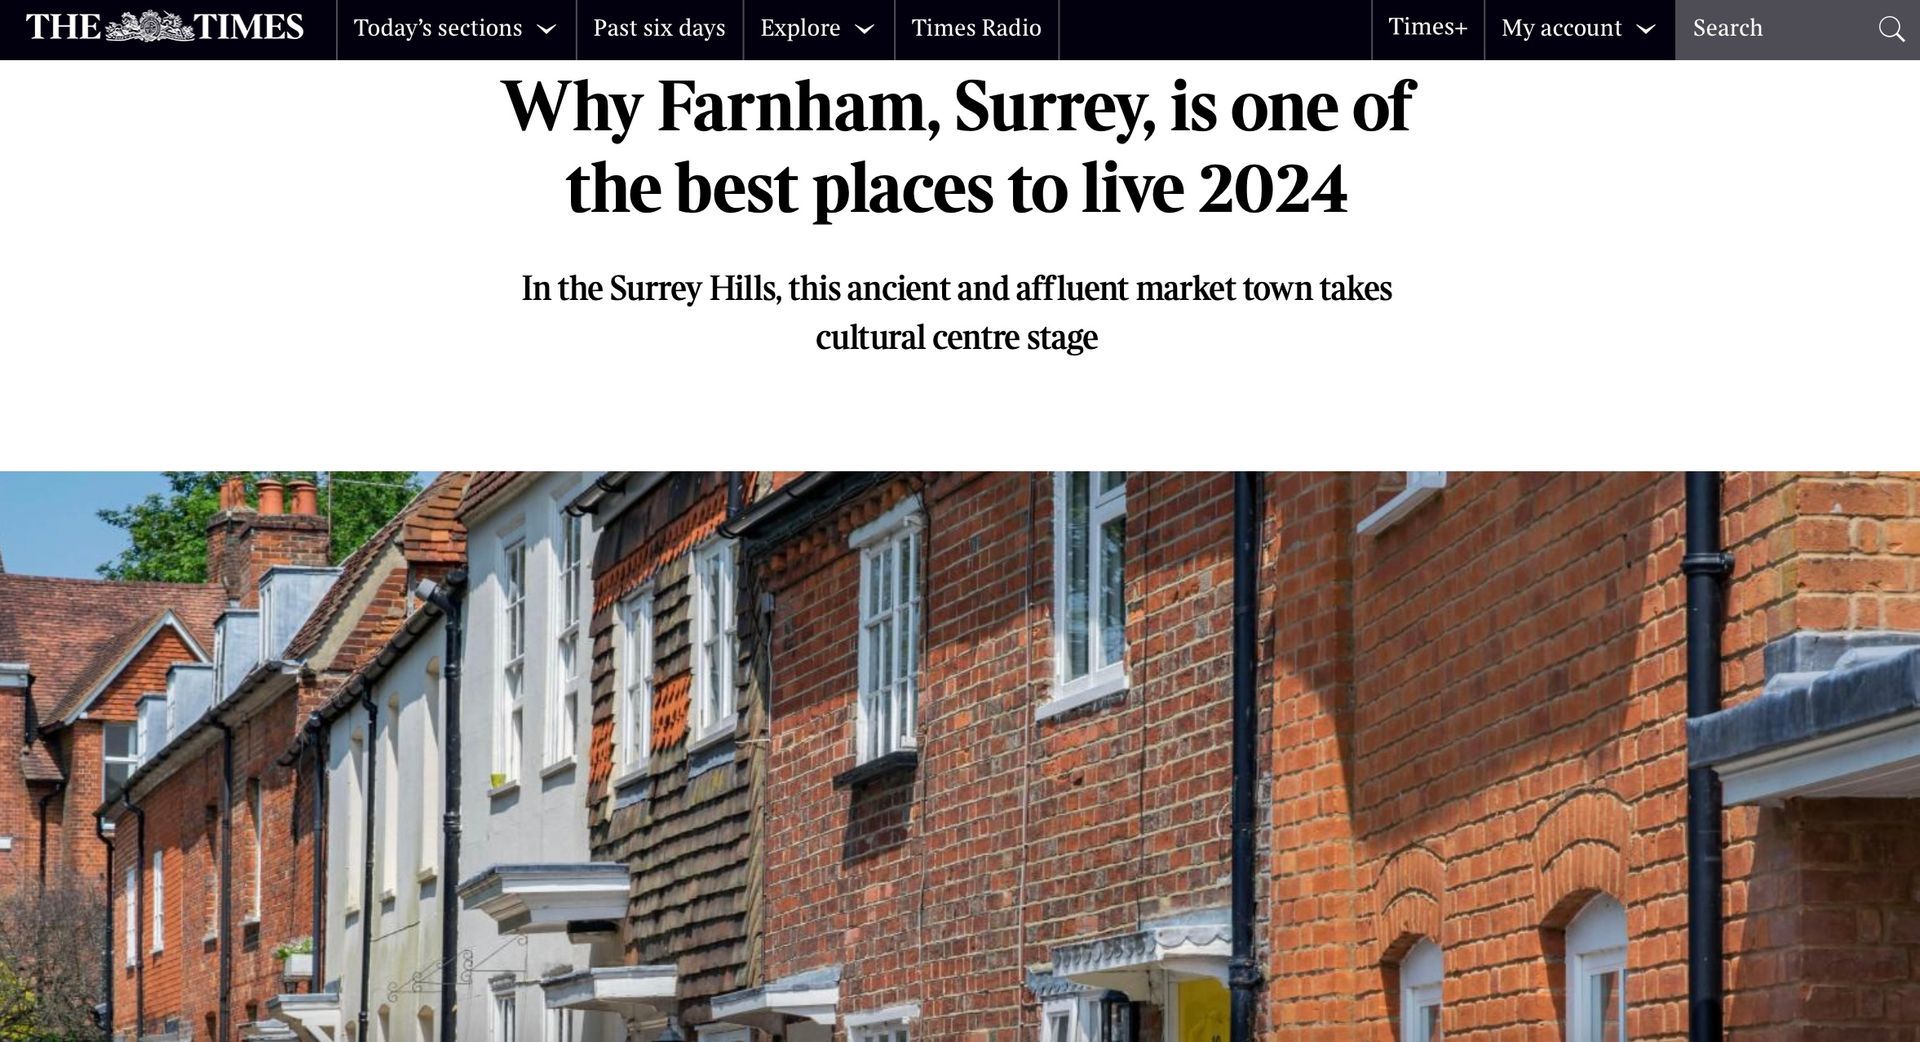 Farnham in the Sunday Times as the best place to live in 2024